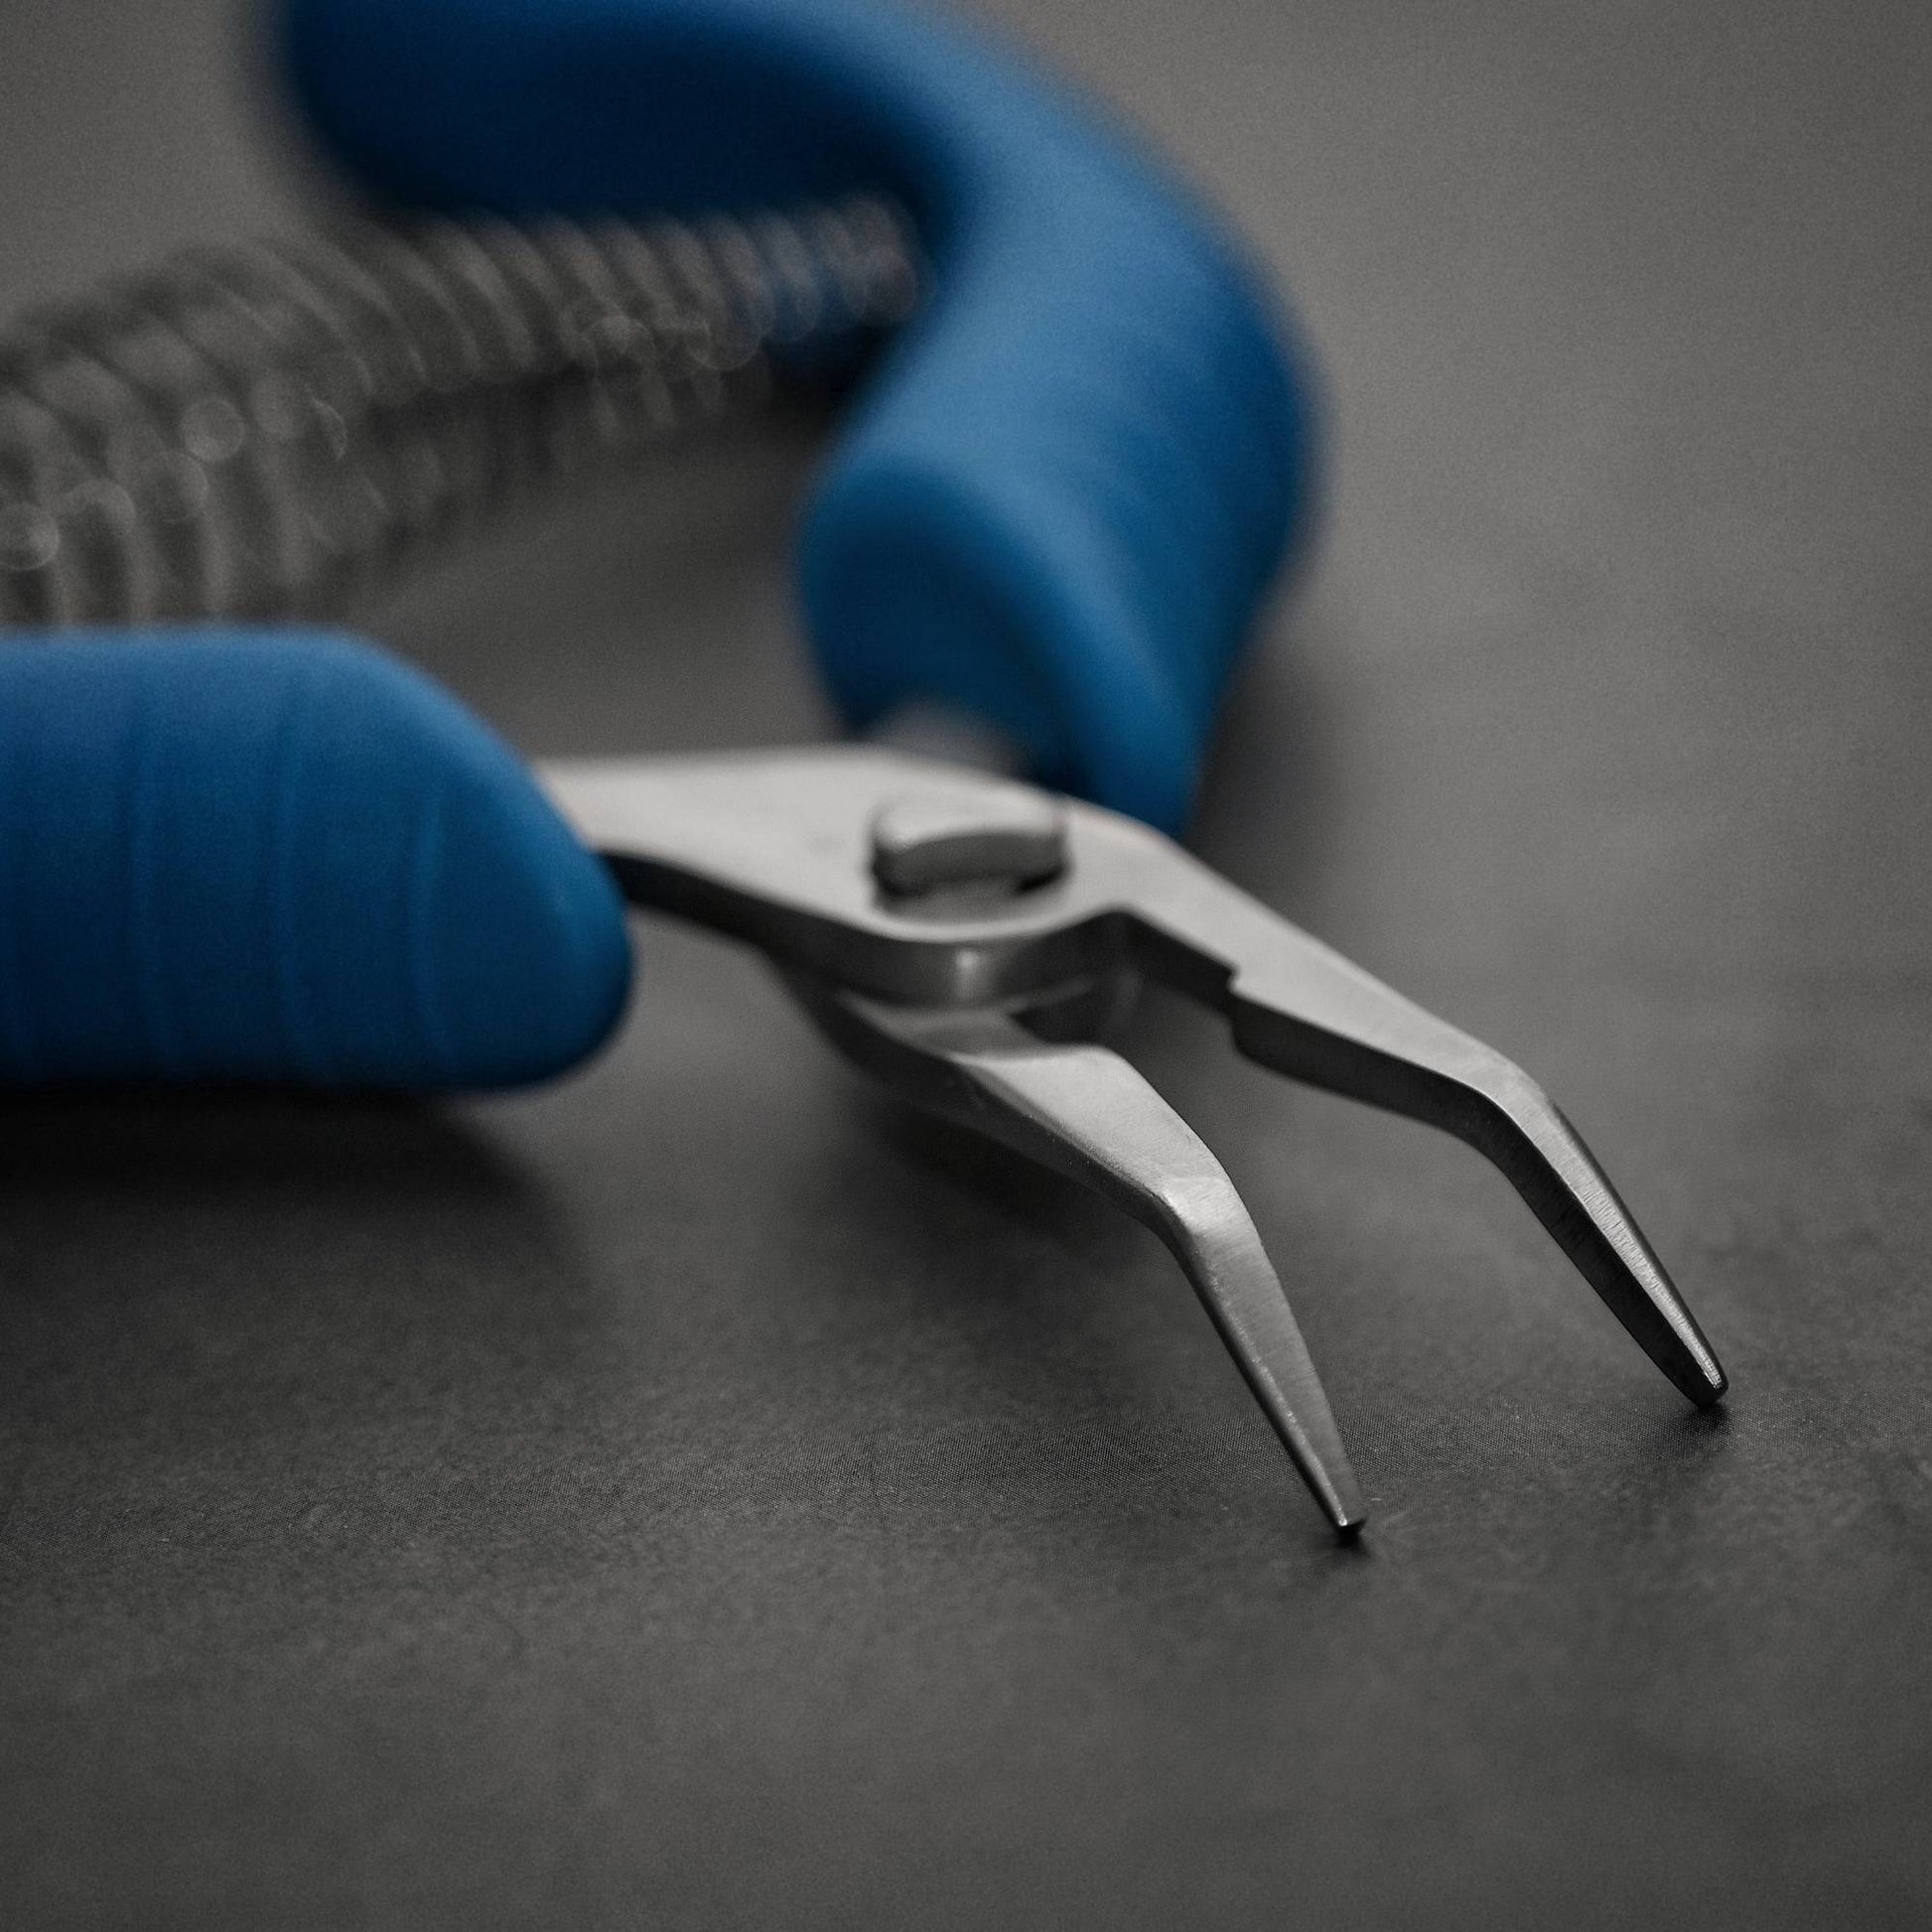 A close up view of Asahi Fish Bone Tweezers made of durable stainless steel with a non-slip grip